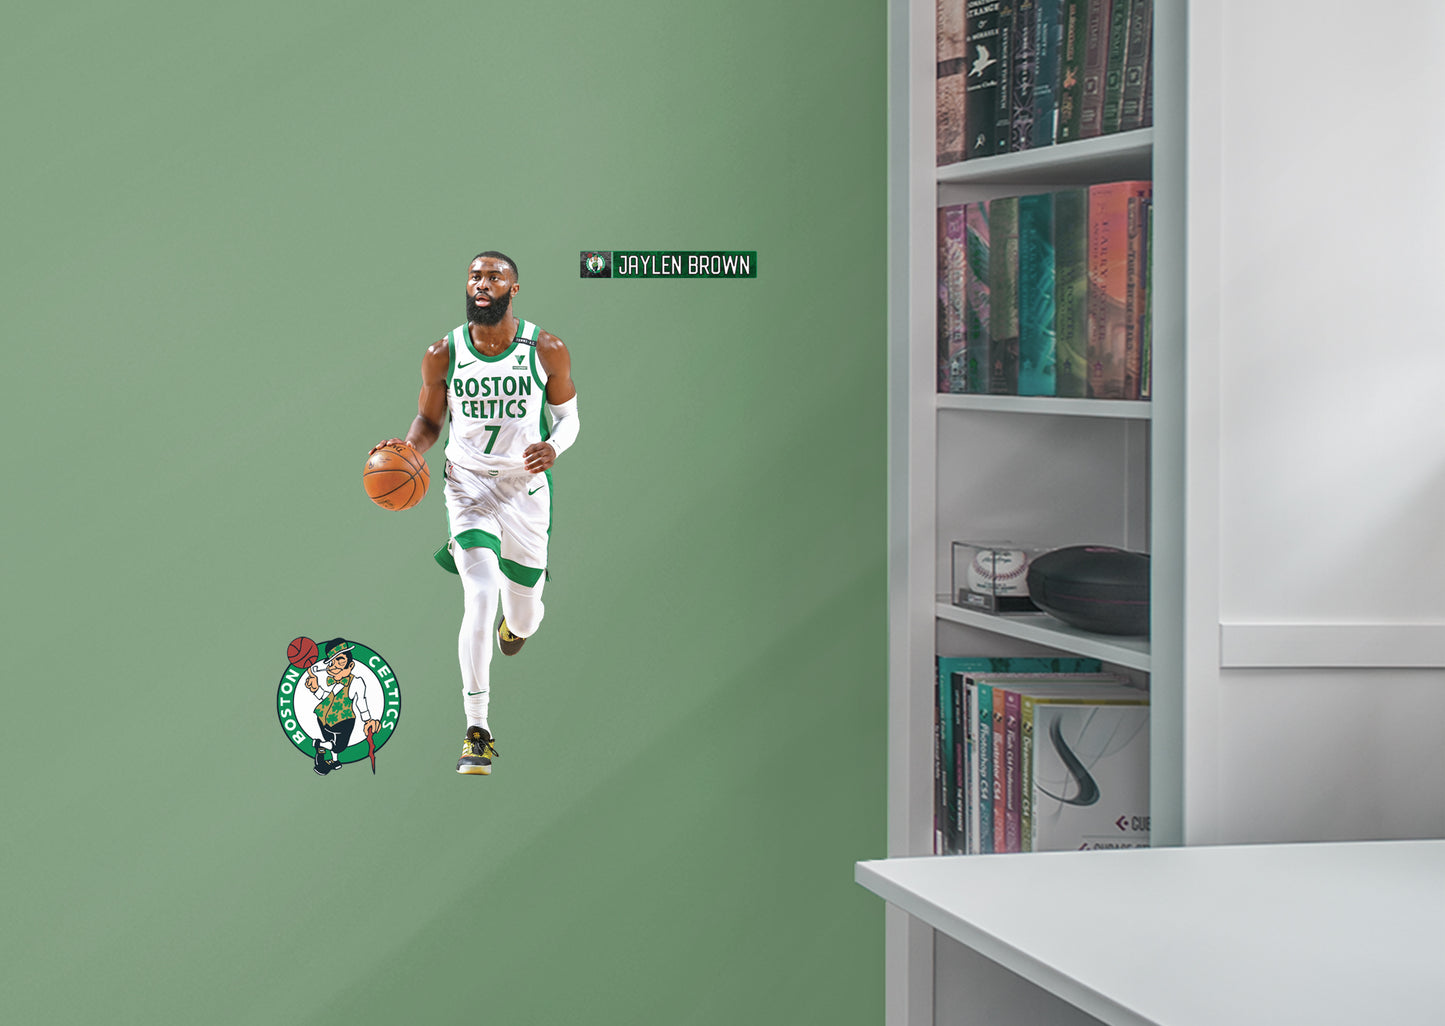 Boston Celtics: Jaylen Brown NBA Jaylen Brown 2021        - Officially Licensed NBA Removable Wall   Adhesive Decal